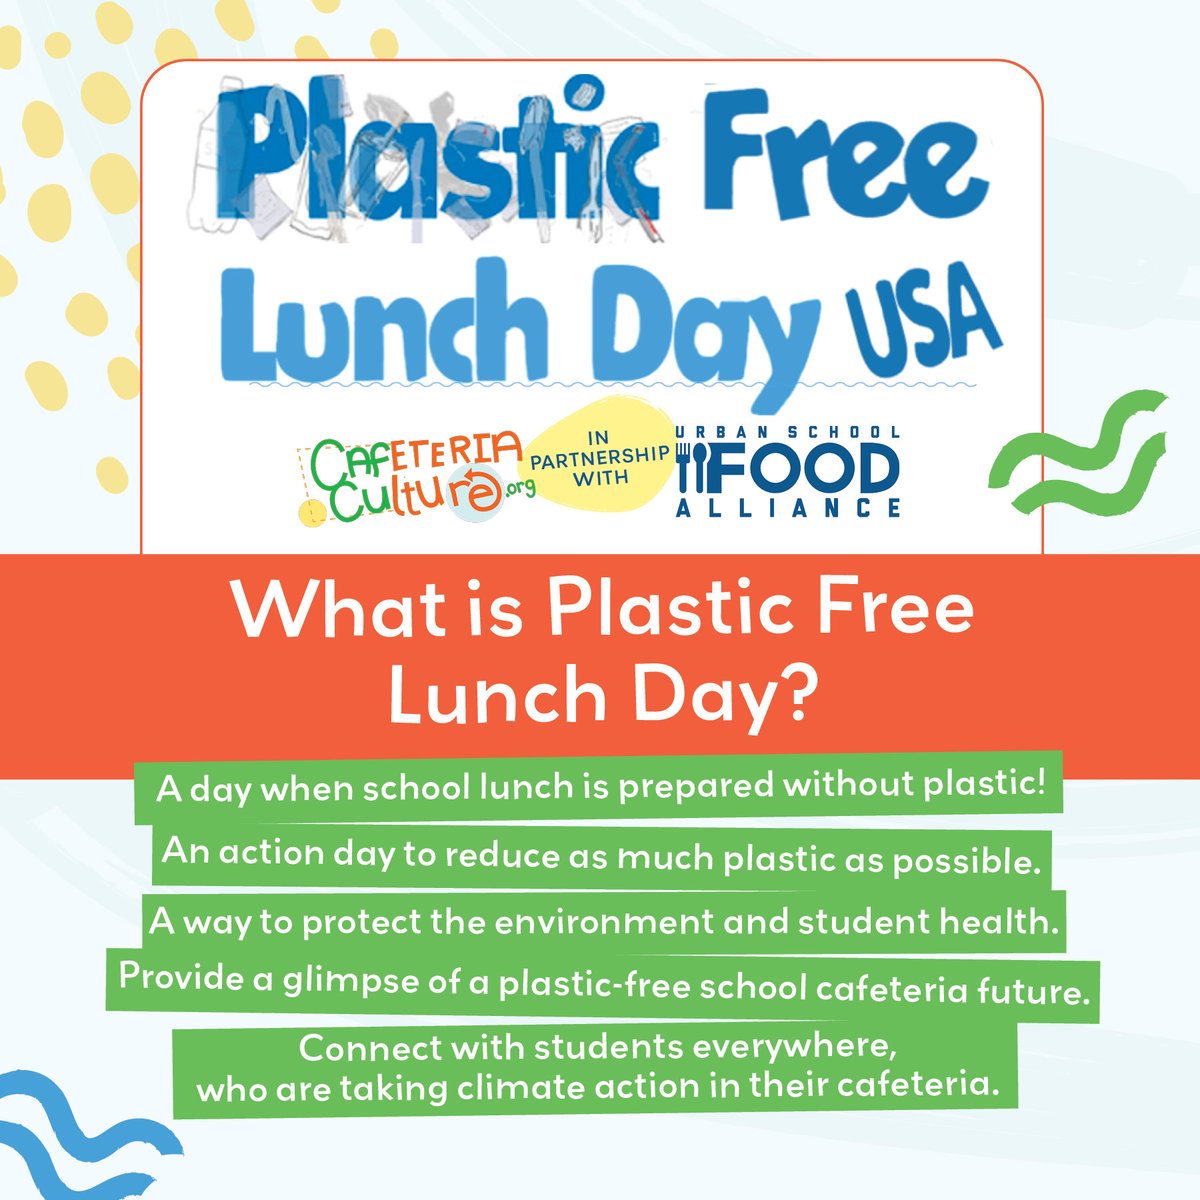 Today, Nov 2nd, we are joining school cafeterias across the US to eliminate or reduce single-use plastic food ware. Will you join us to protect student health and the environment? One #plasticfree day leads to another! #plasticfreelunch #cafcu #USFA cc: @NYCSchools